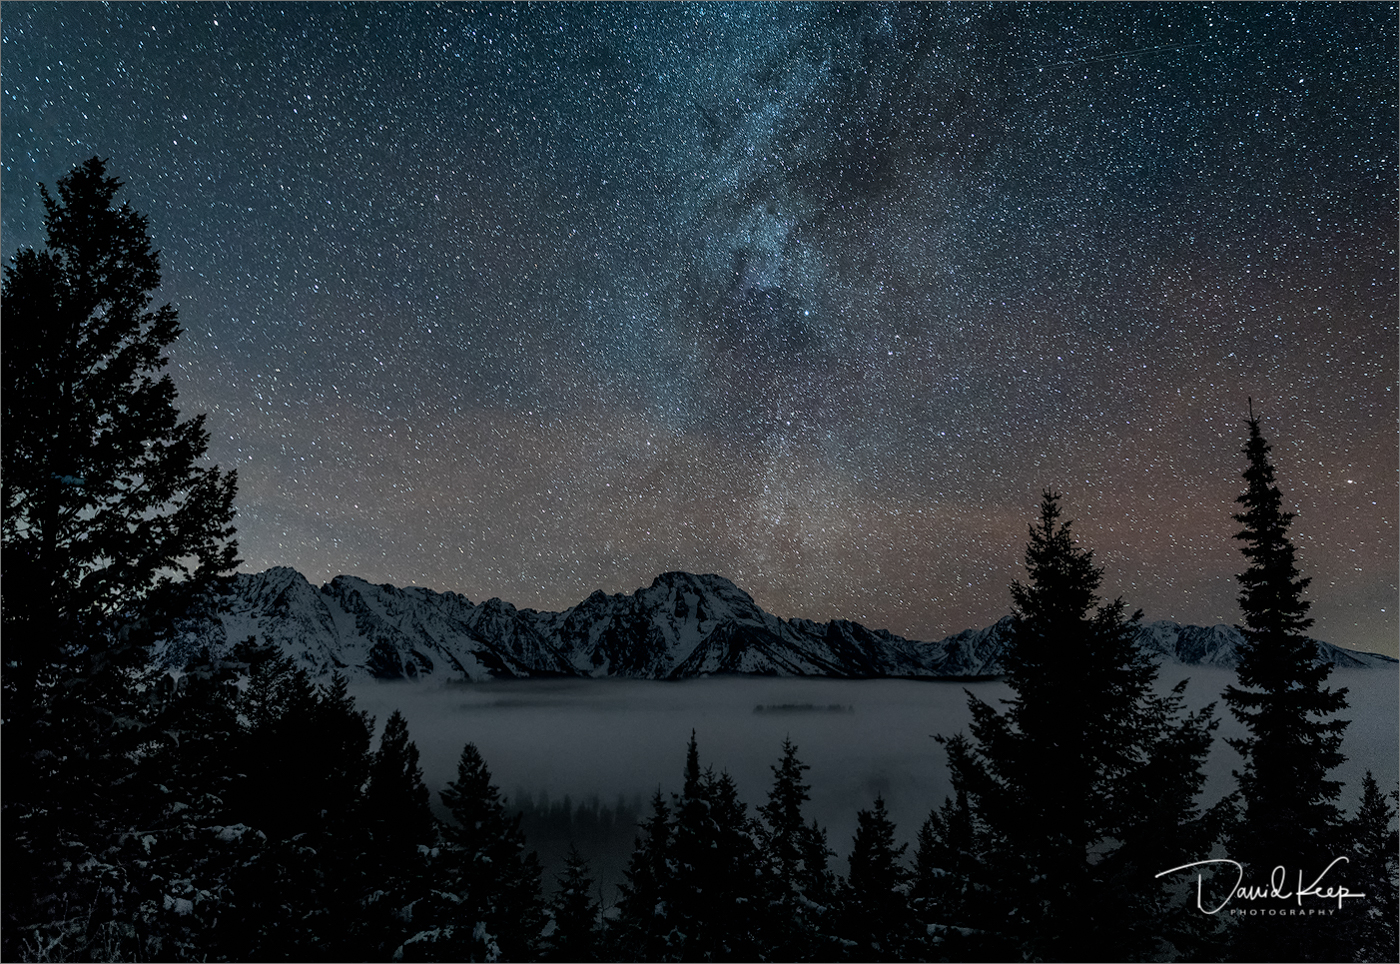 Milky Way over the Tetons